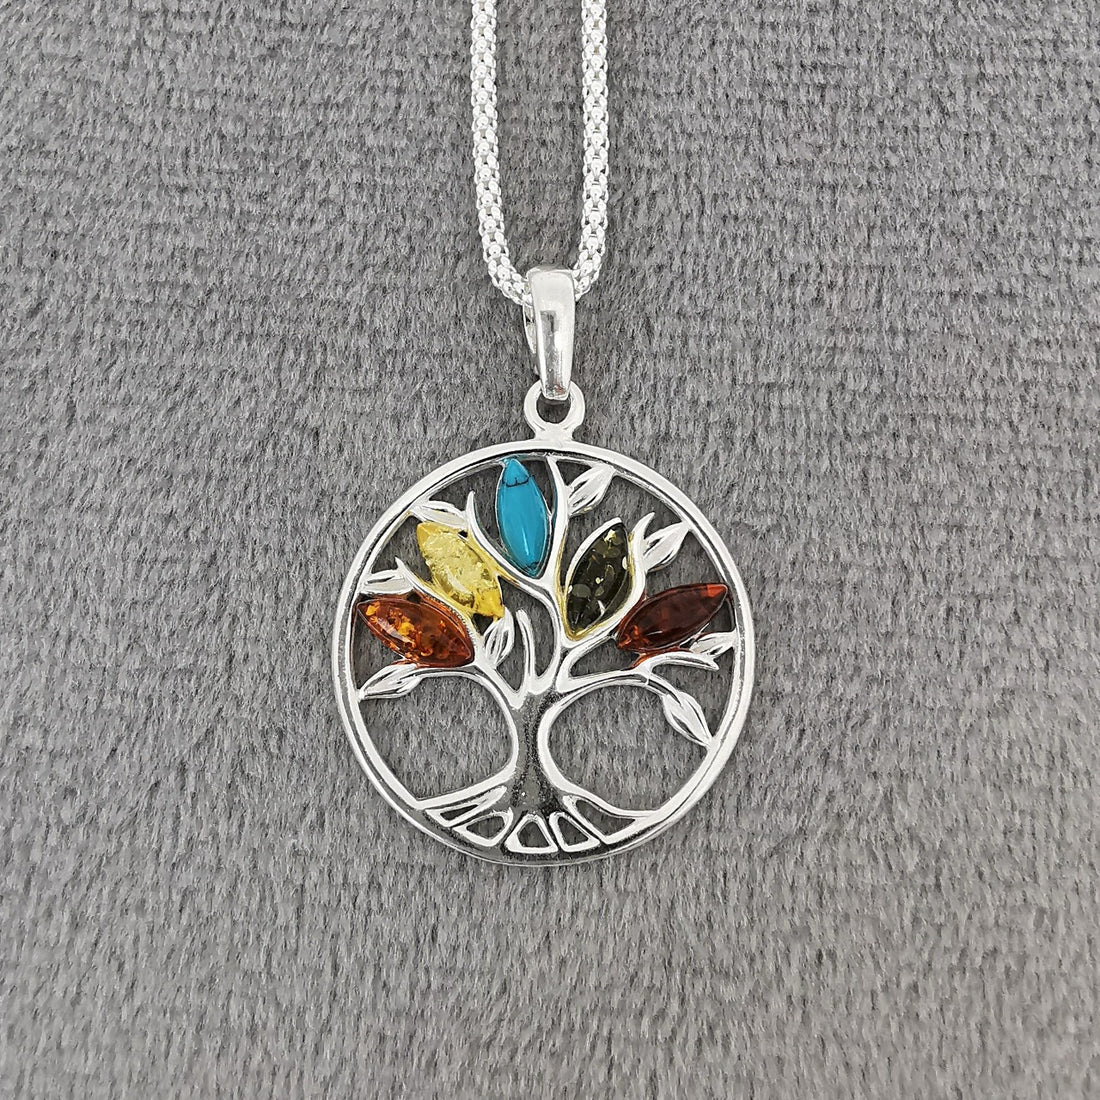 Silver Amber Tree of Life pendant with Turquoise